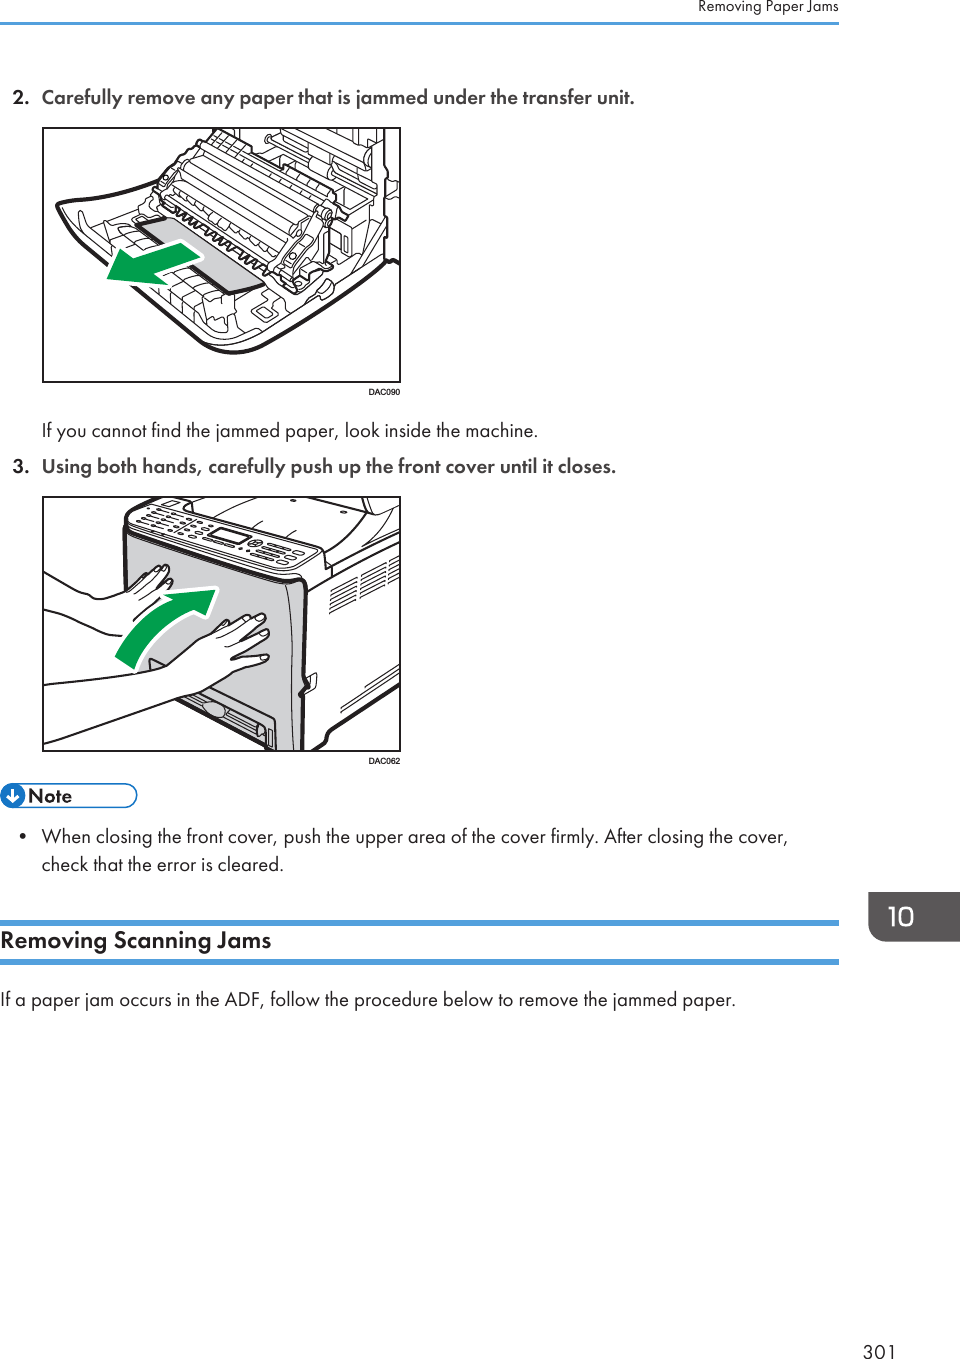 2. Carefully remove any paper that is jammed under the transfer unit.DAC090If you cannot find the jammed paper, look inside the machine.3. Using both hands, carefully push up the front cover until it closes.DAC062• When closing the front cover, push the upper area of the cover firmly. After closing the cover,check that the error is cleared.Removing Scanning JamsIf a paper jam occurs in the ADF, follow the procedure below to remove the jammed paper.Removing Paper Jams301